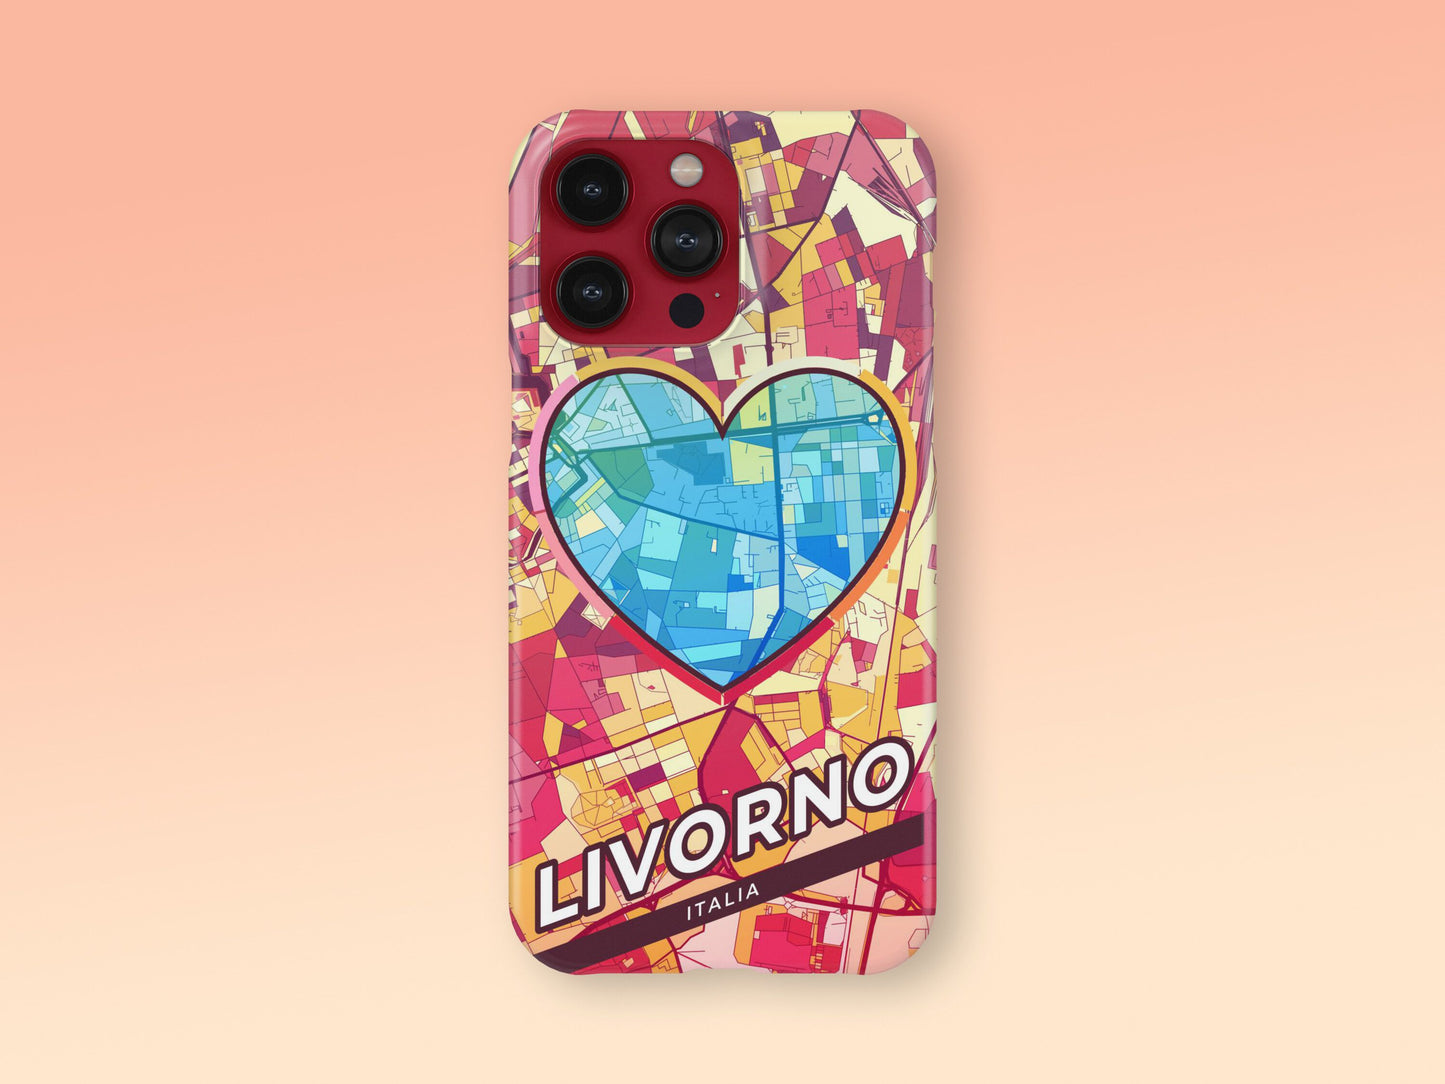 Livorno Italy slim phone case with colorful icon. Birthday, wedding or housewarming gift. Couple match cases. 2